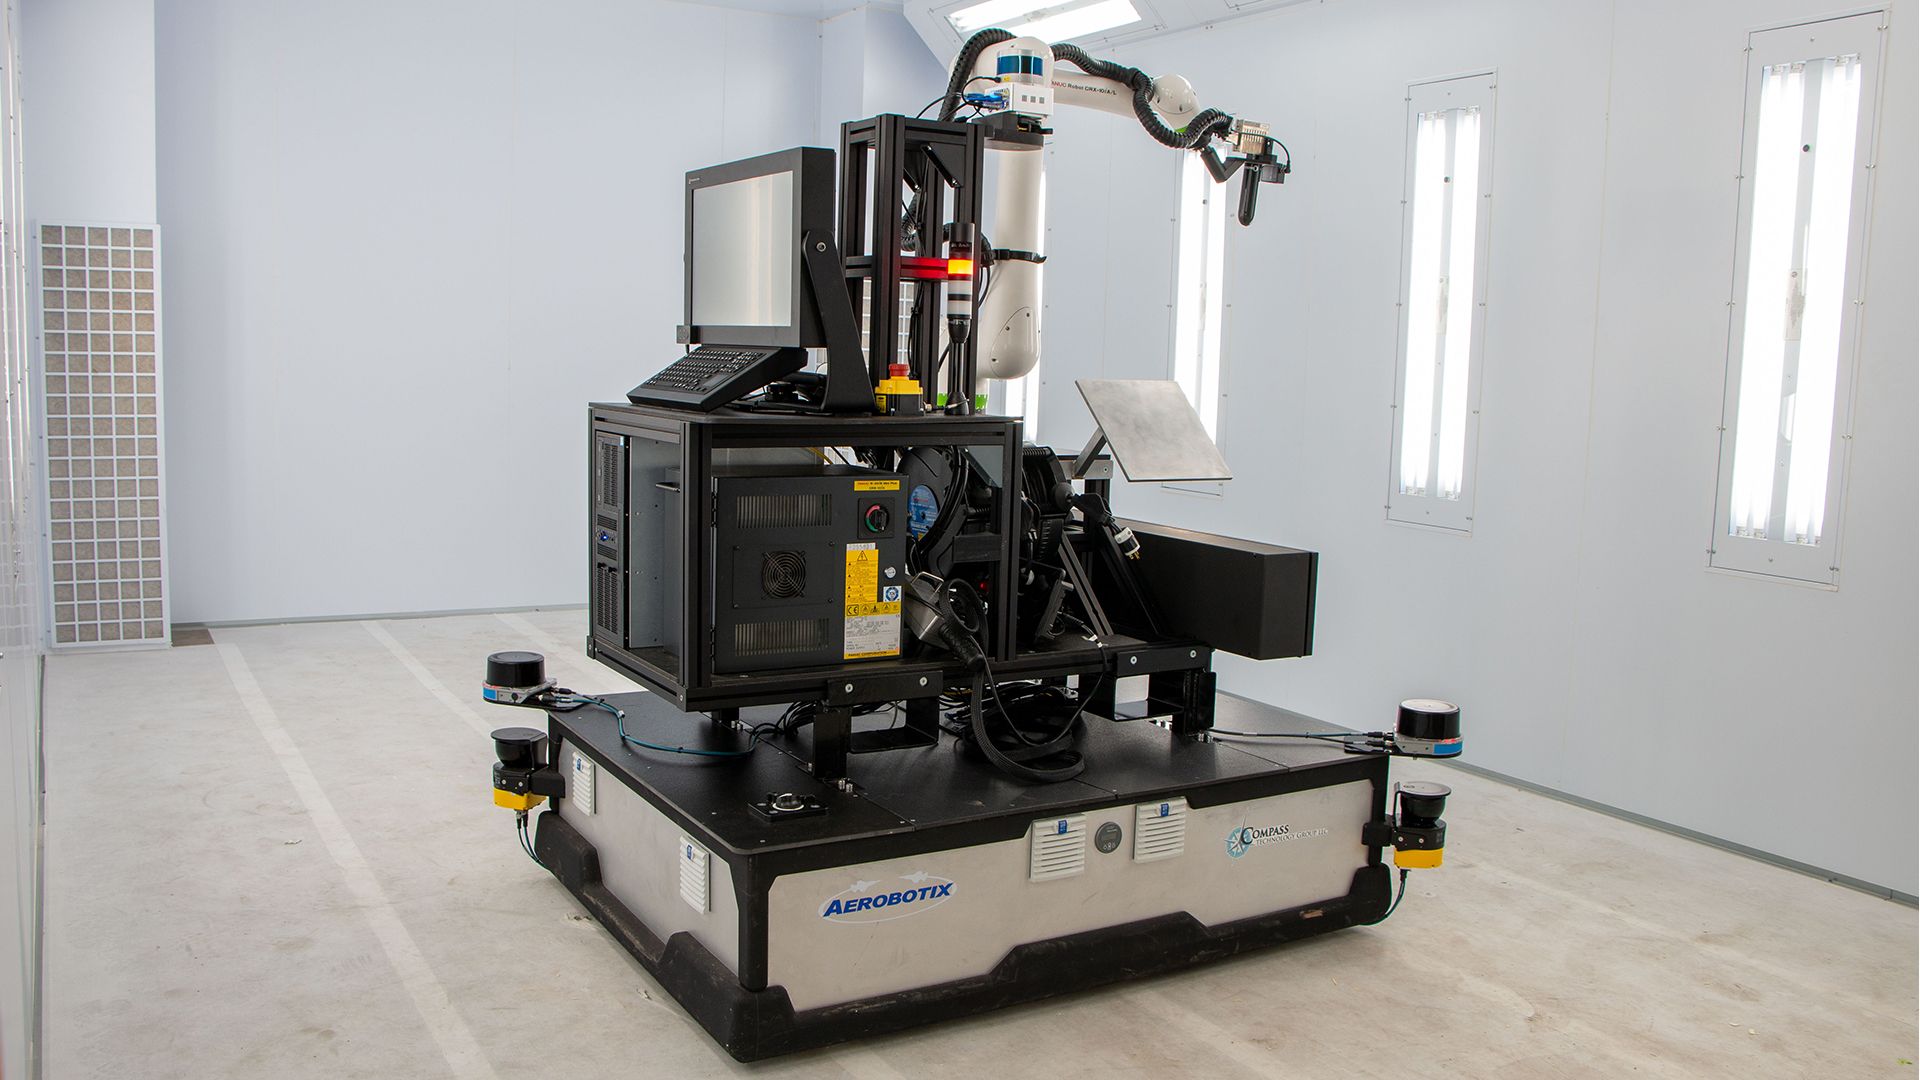 Aerobotix’s automated guided vehicle (or mobile robot), along with the Advanced Microwave Mapping Probe, developed by Compass Technology Group.